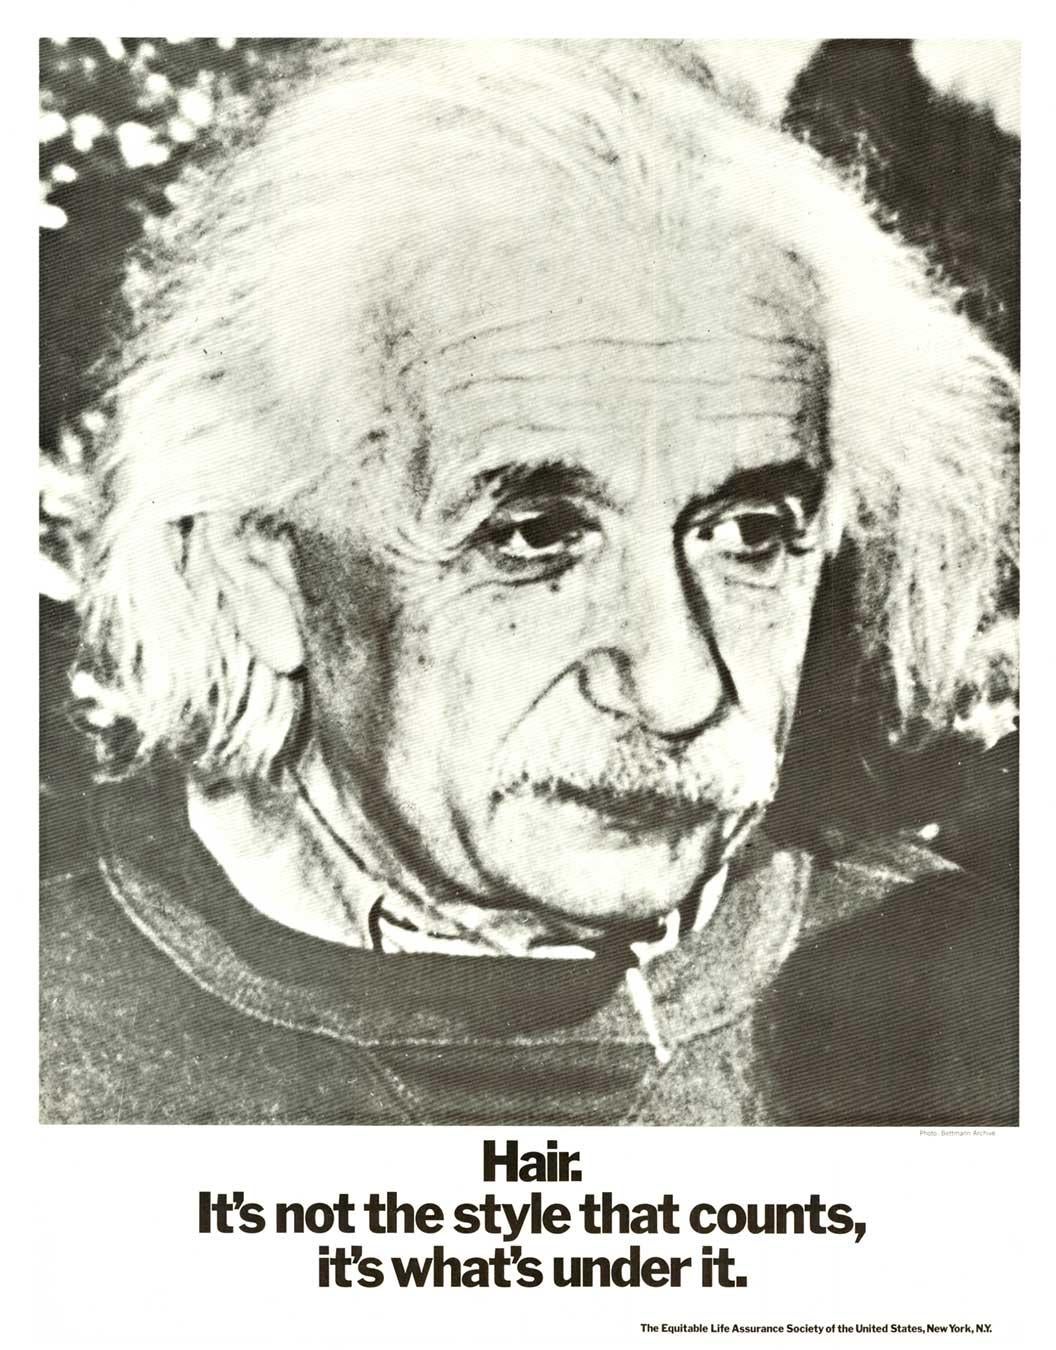 Unknown Print - Original Einstein "Hair.   It's not the style that counts" vintage poster